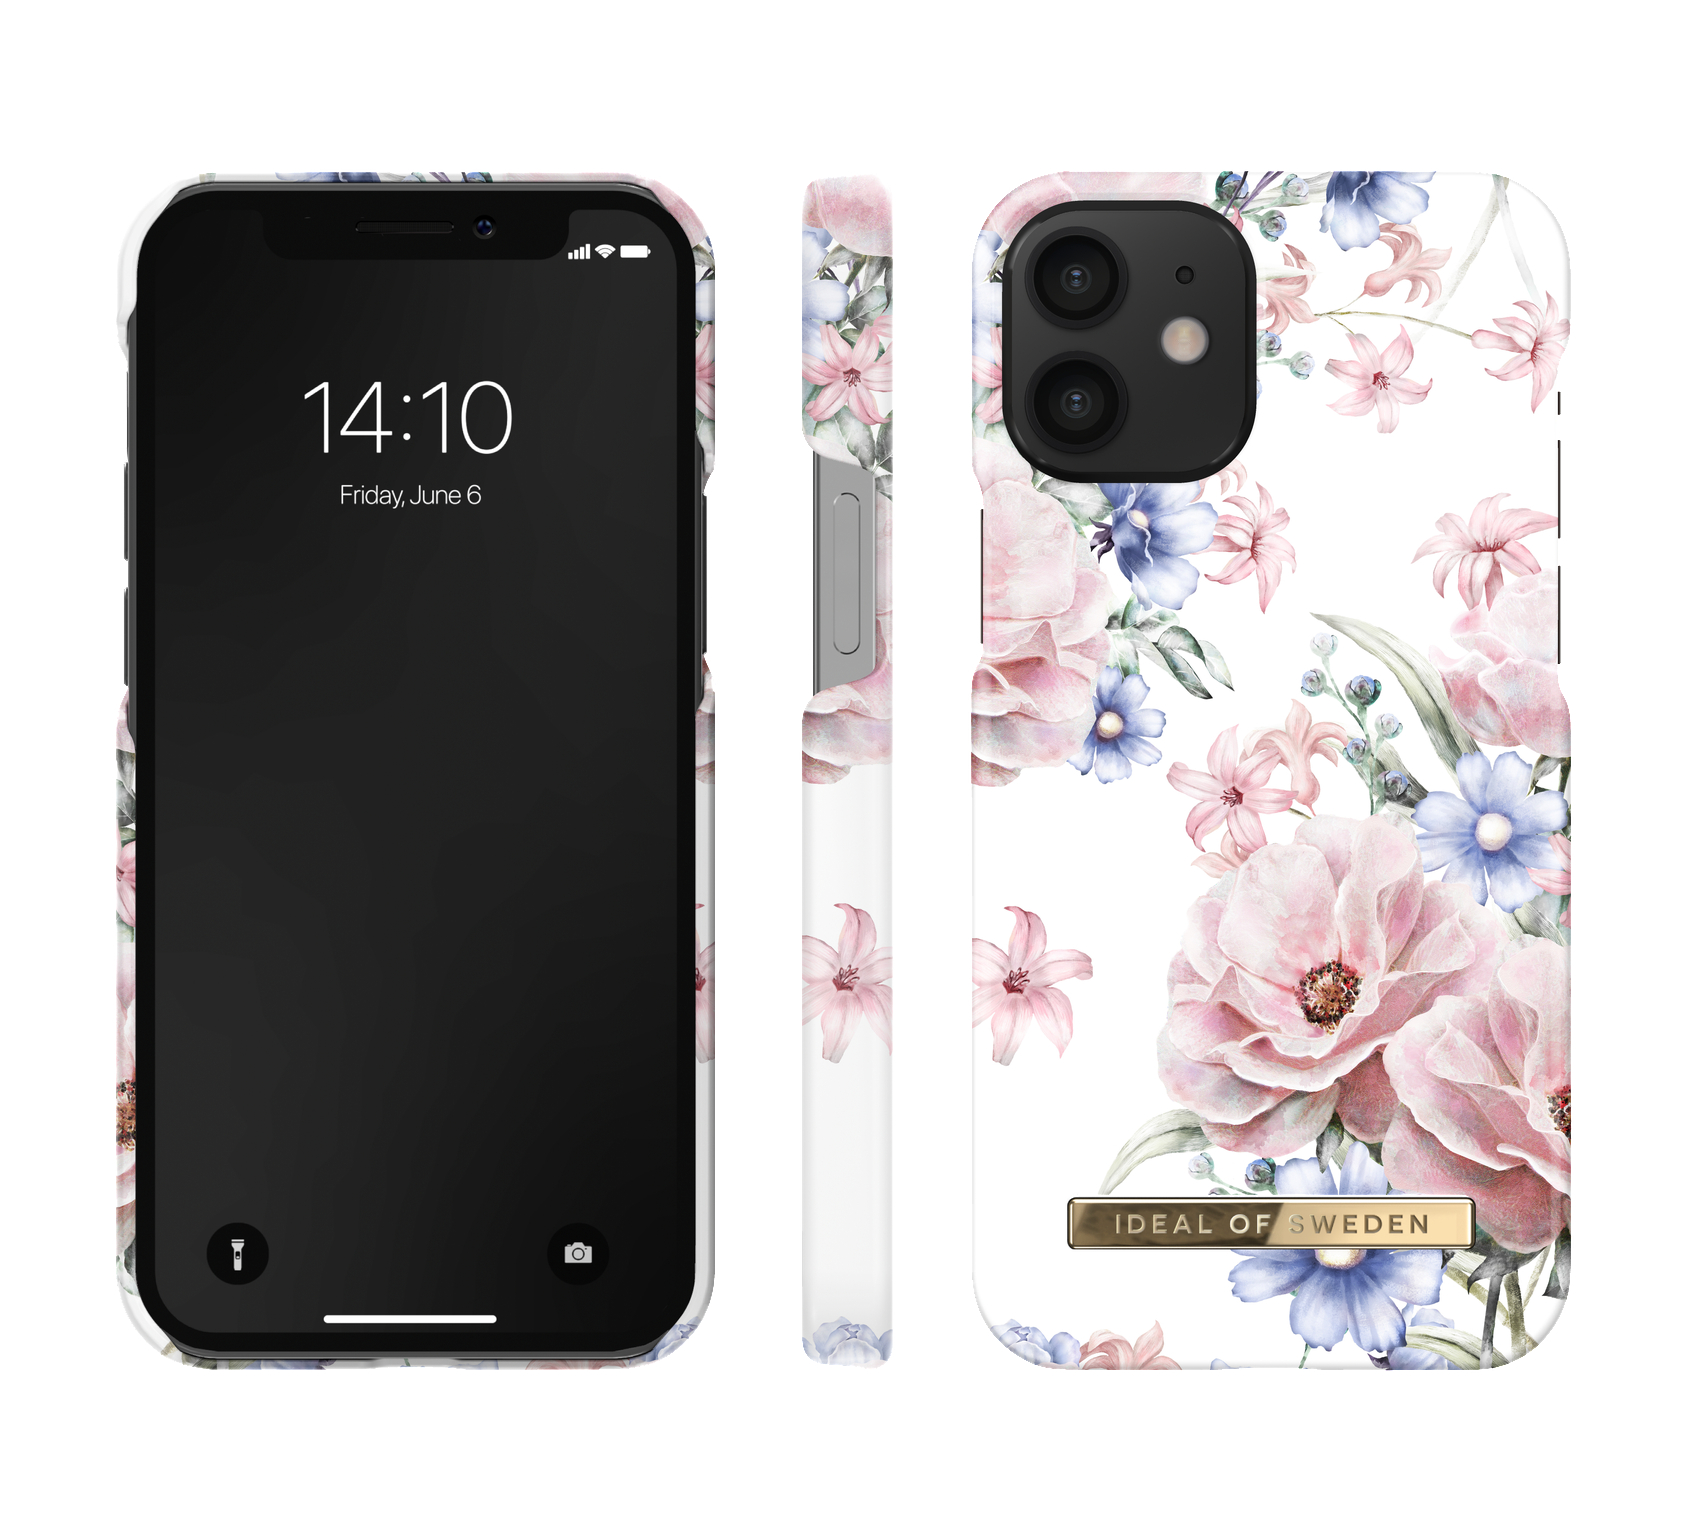 Apple, Mini, OF Case, IDEAL 12 iPhone SWEDEN Romance Backcover, Fashion Floral